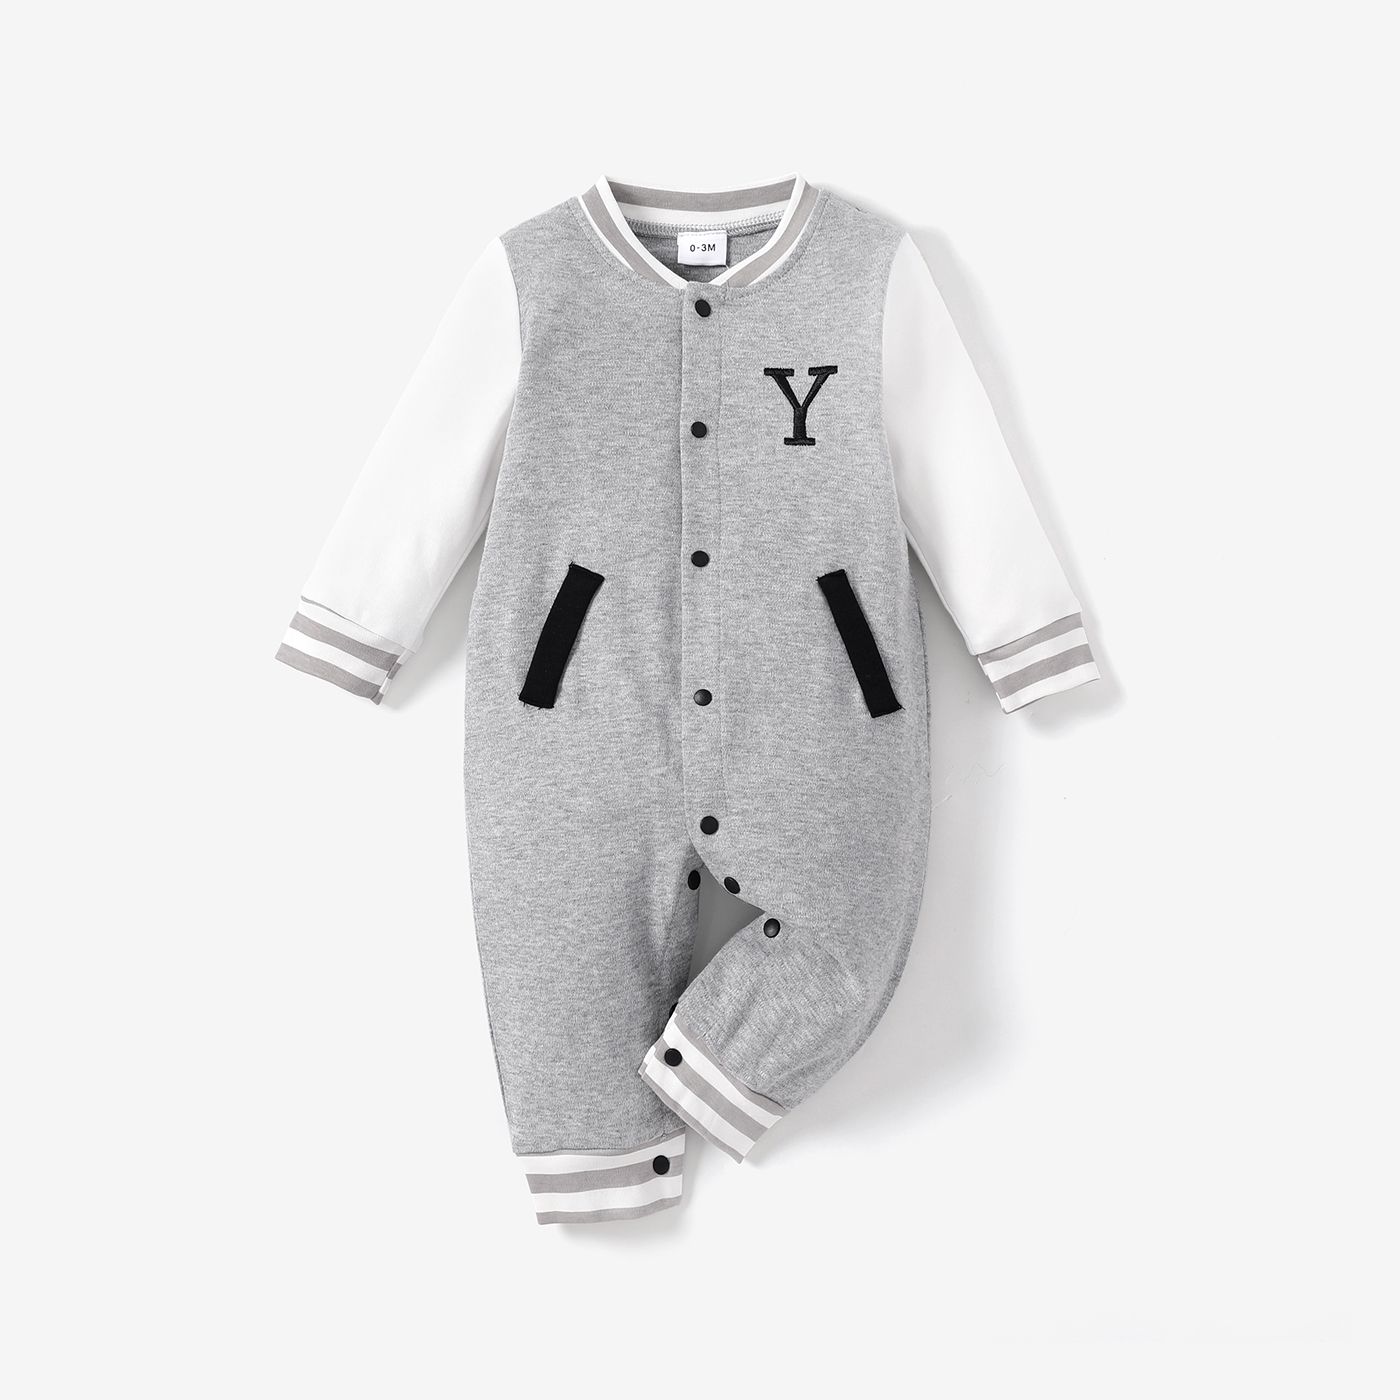 100% Cotton Baby Boy/Girl Letter Embroidered Spliced Long-sleeve Sporty Jumpsuit